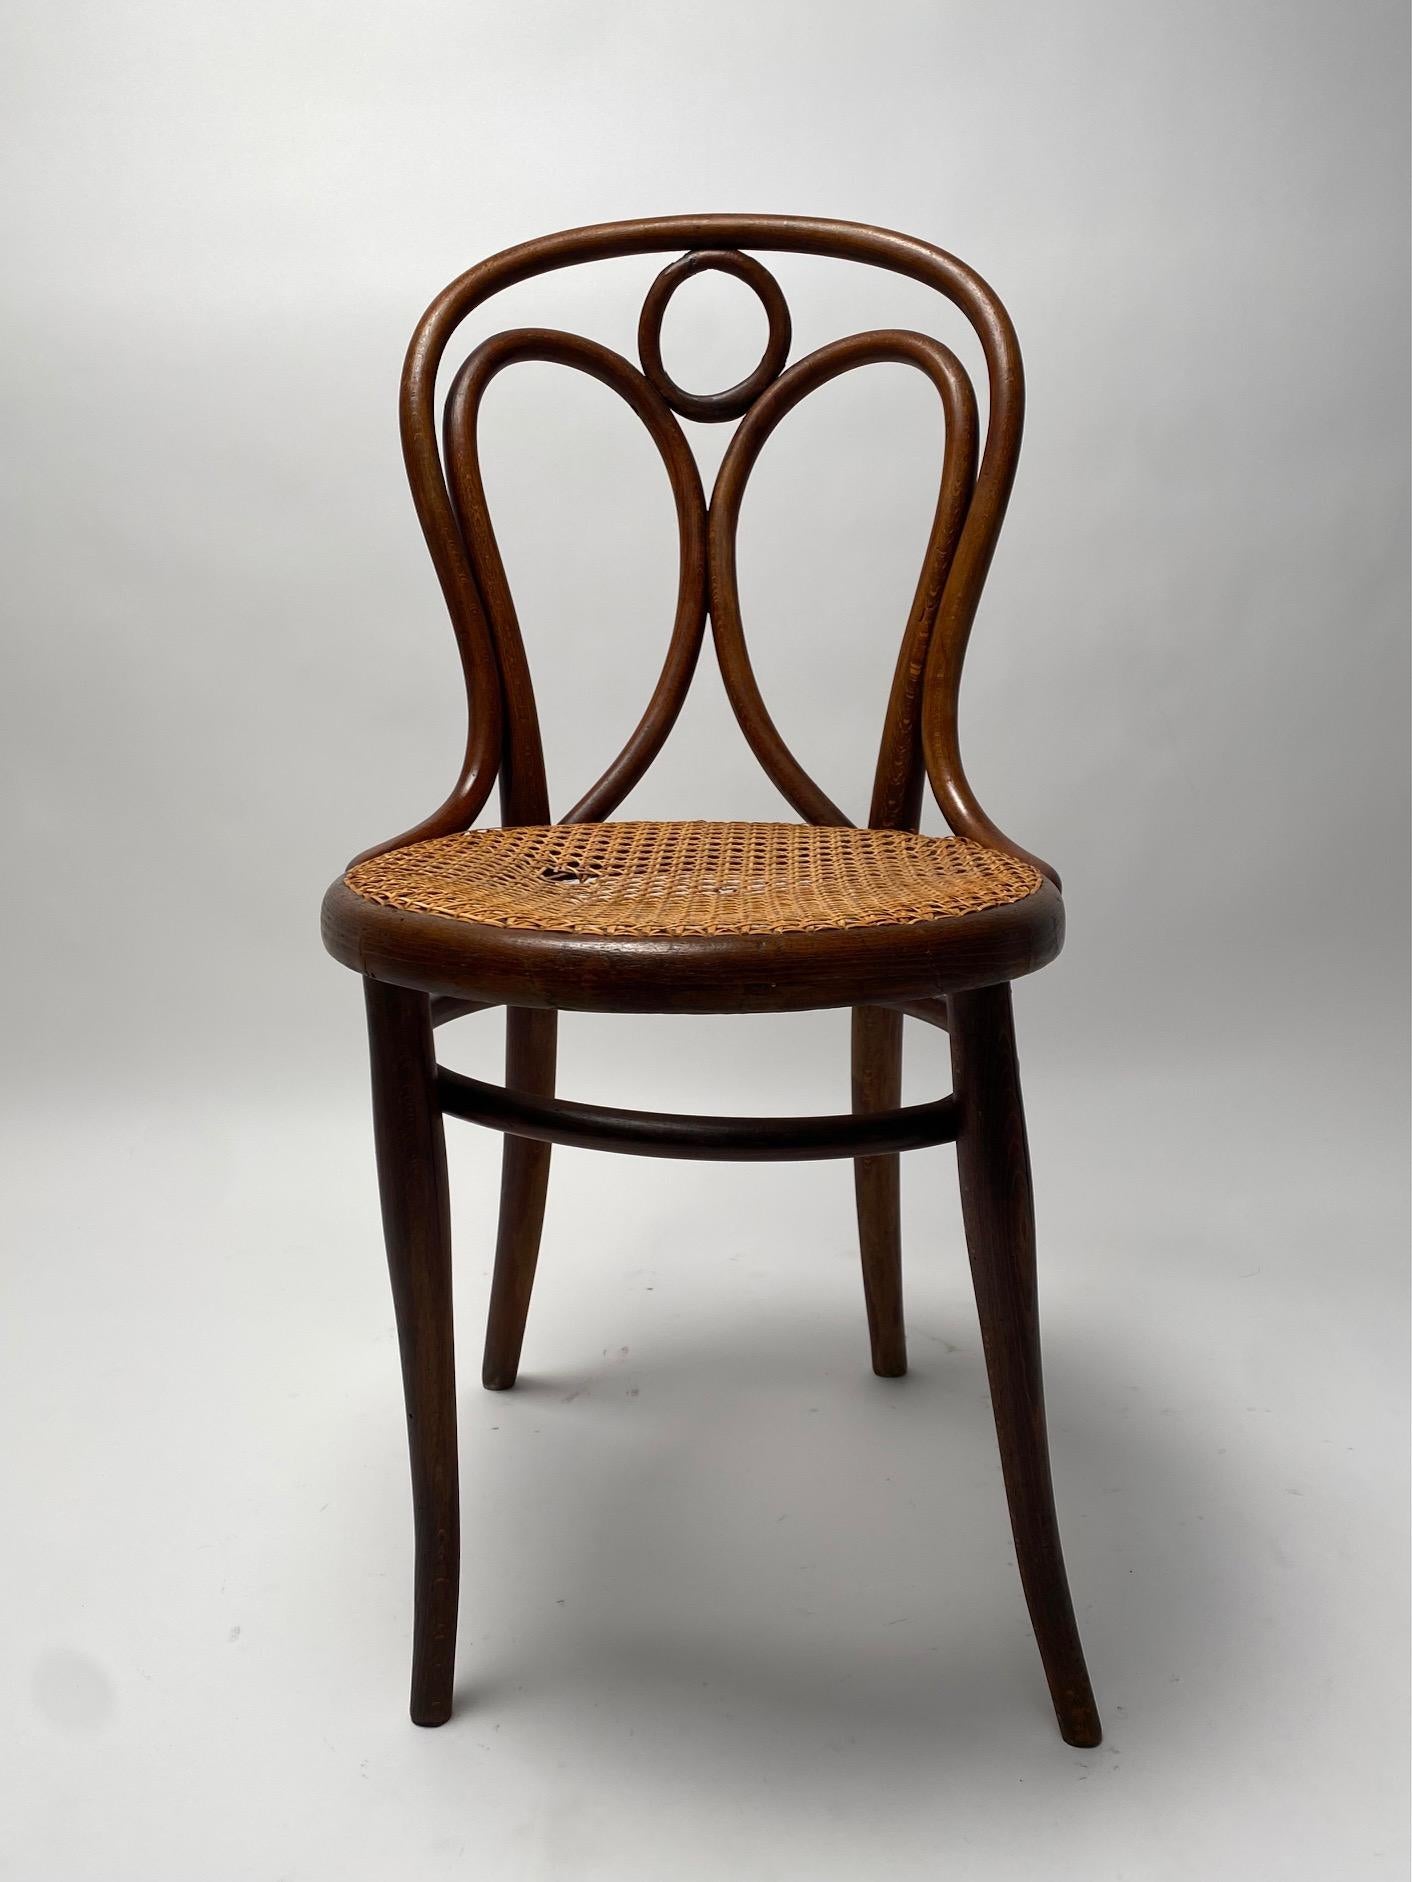 Set of 4 Thonet bent beech chairs, Austria, early 1900s

It is a classic but very elegant model of chairs, made with the famous technique of bending beech using water vapor. An icon of style and modernity